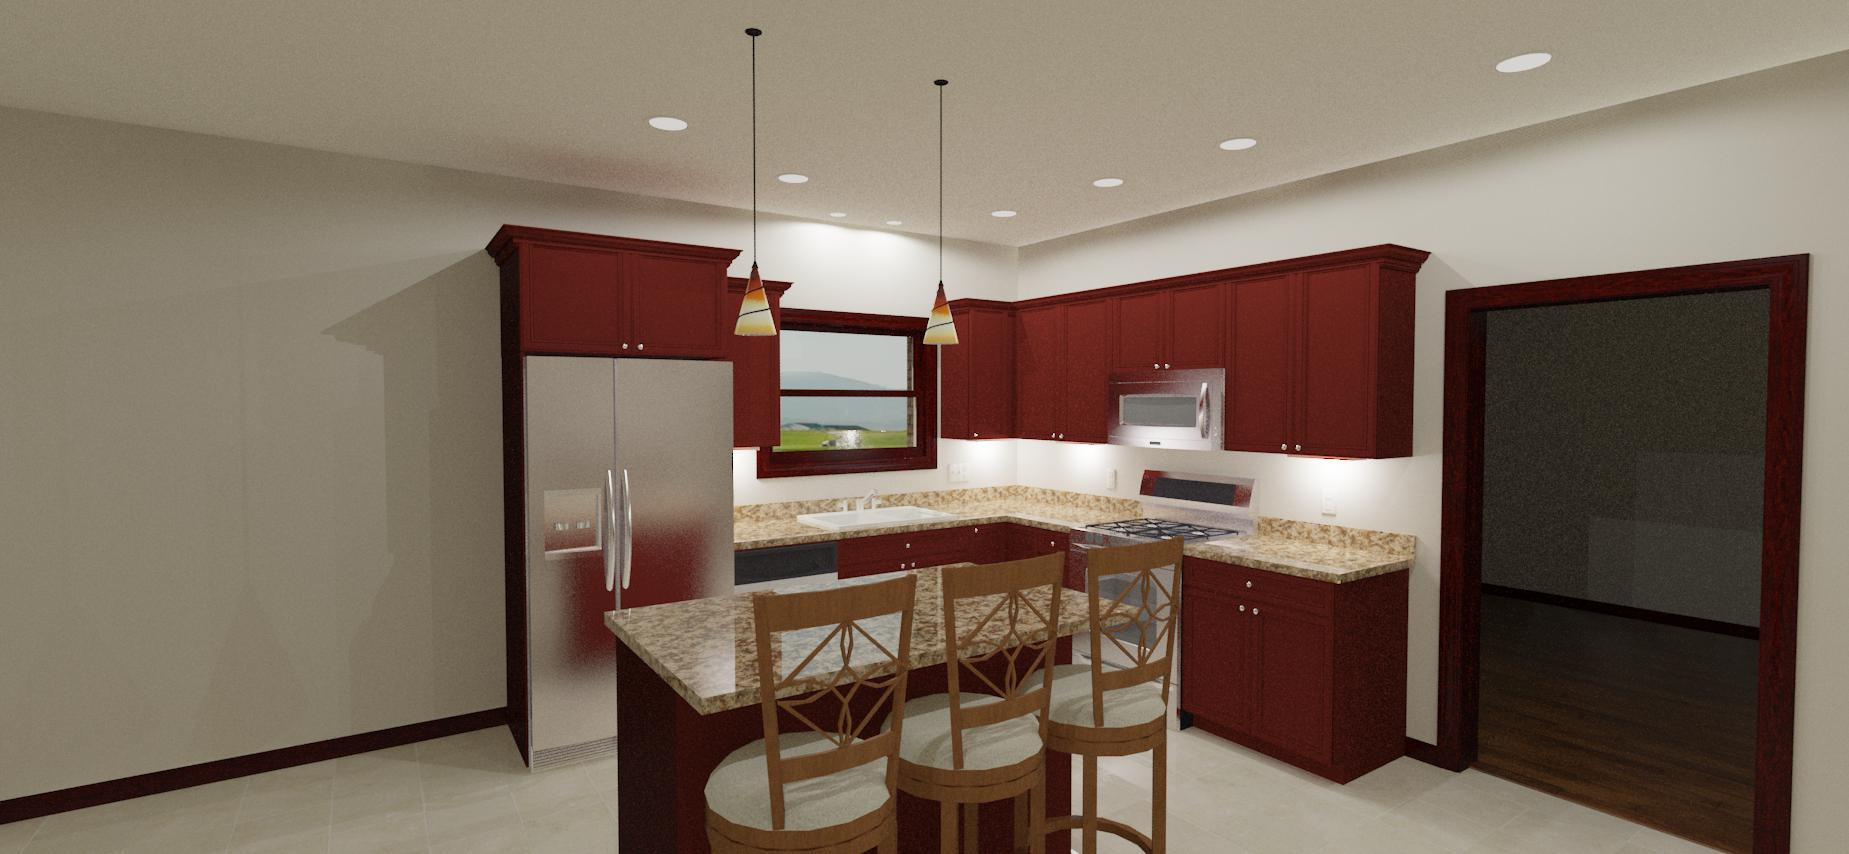 spacing for kitchen recessed lighting